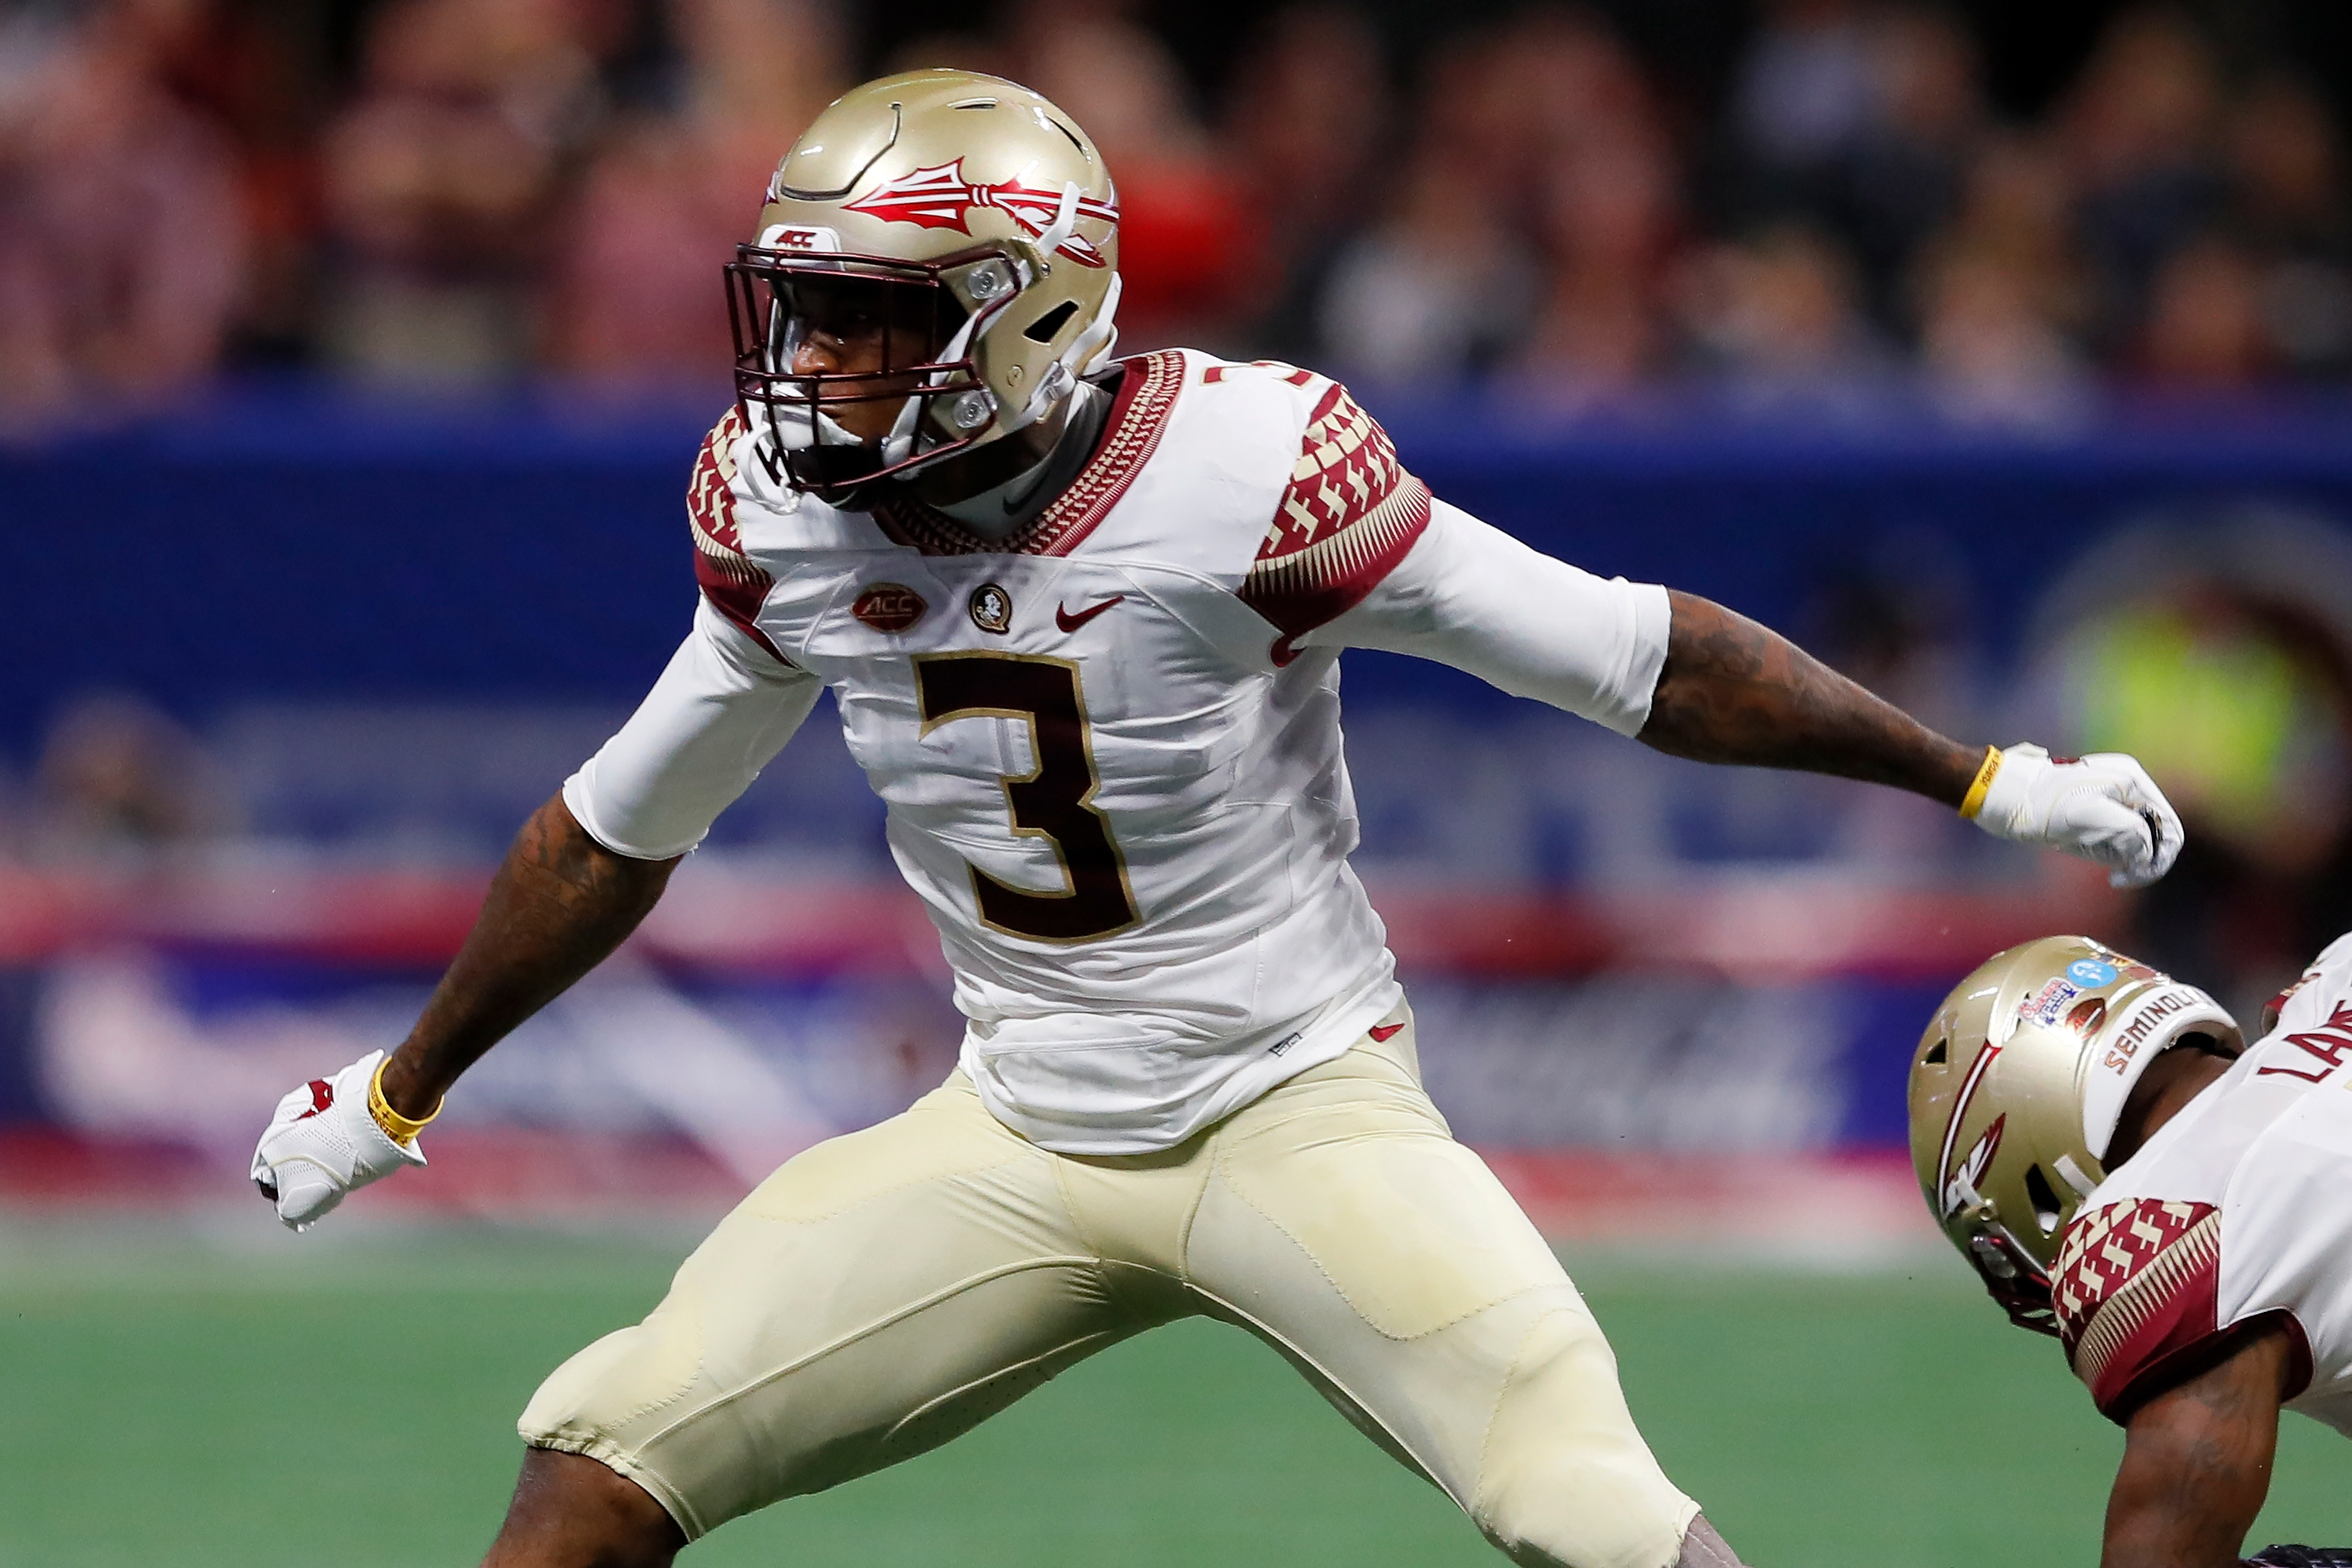 2018 NFL Draft: Derwin James falls into Chargers' lap